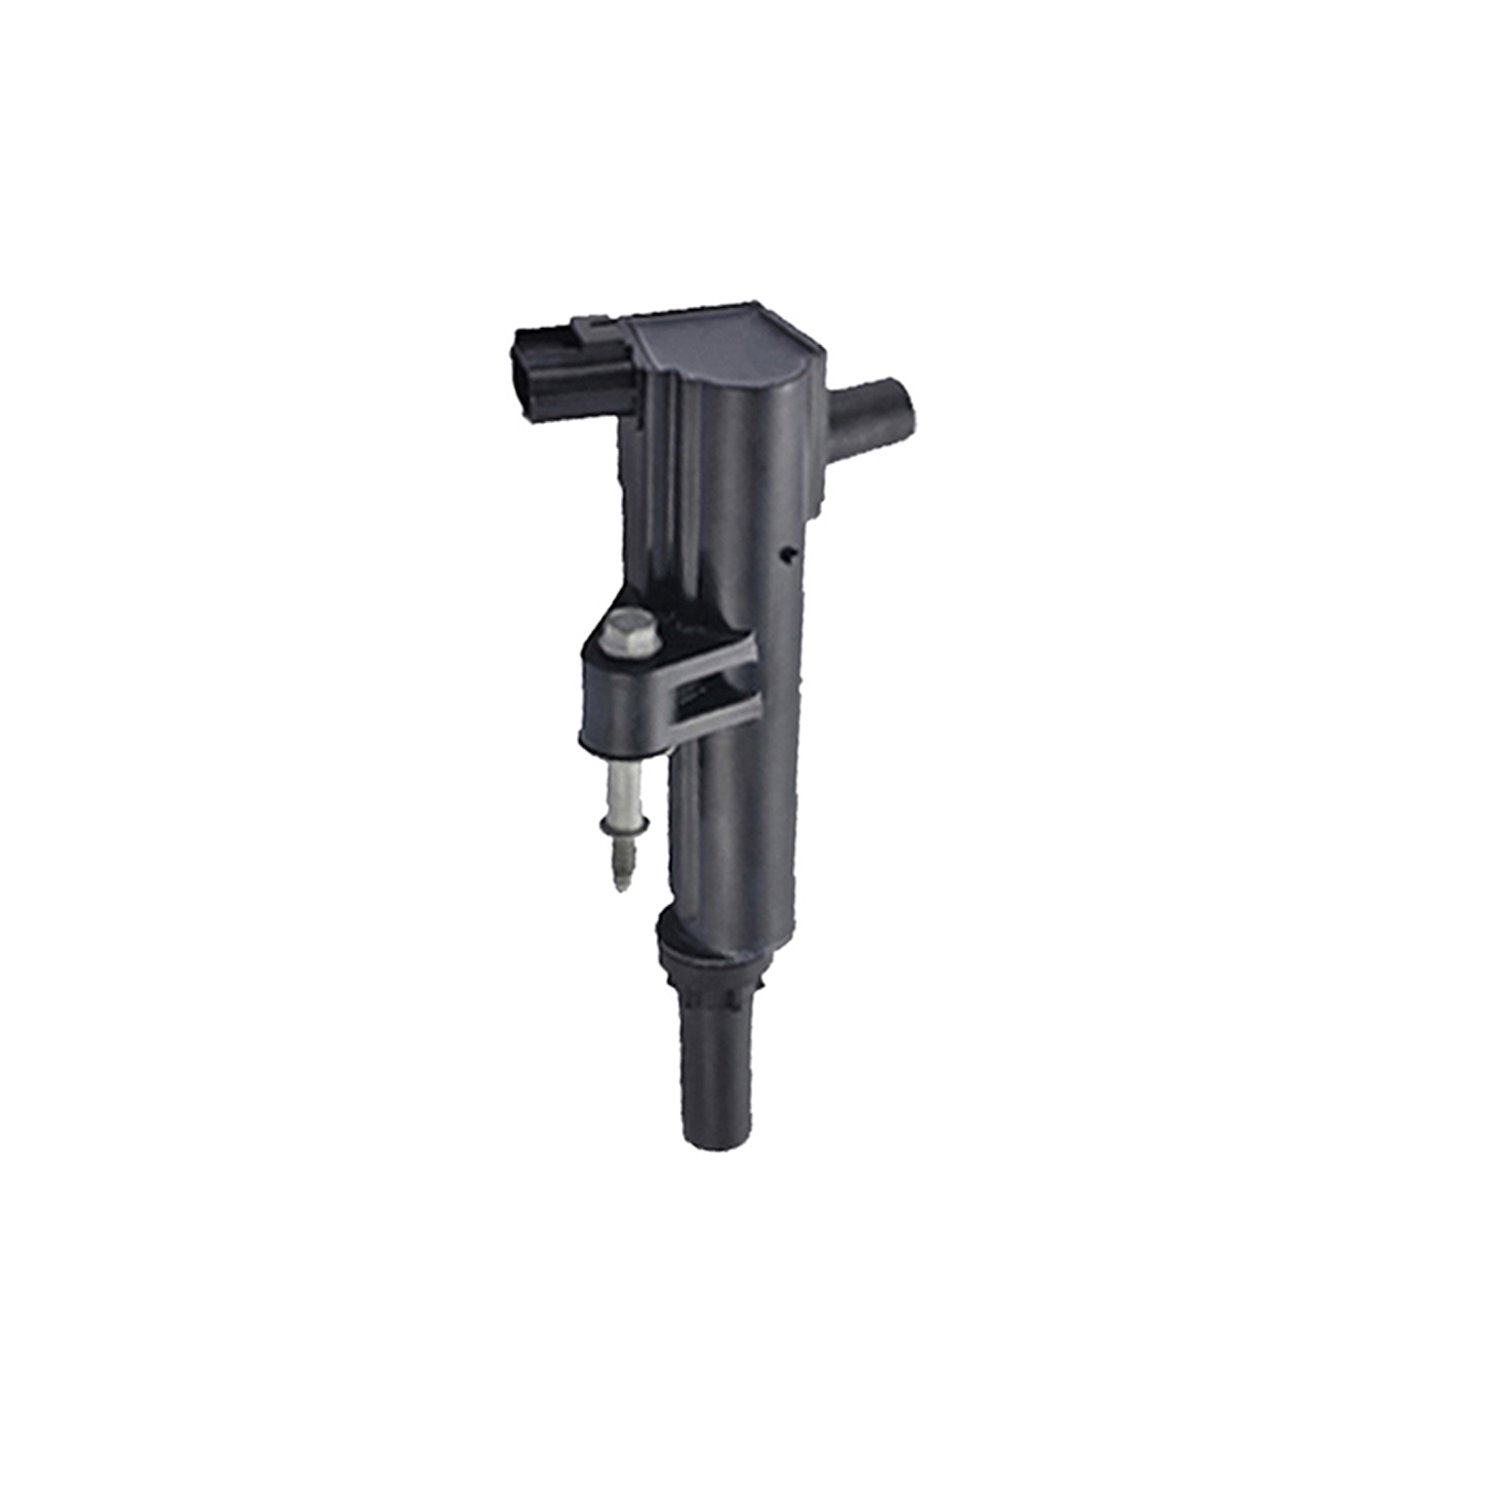 OE Replacement Ignition Coil for Grand Cherokee, Chrysler Dodge Jeep V8 4.7L